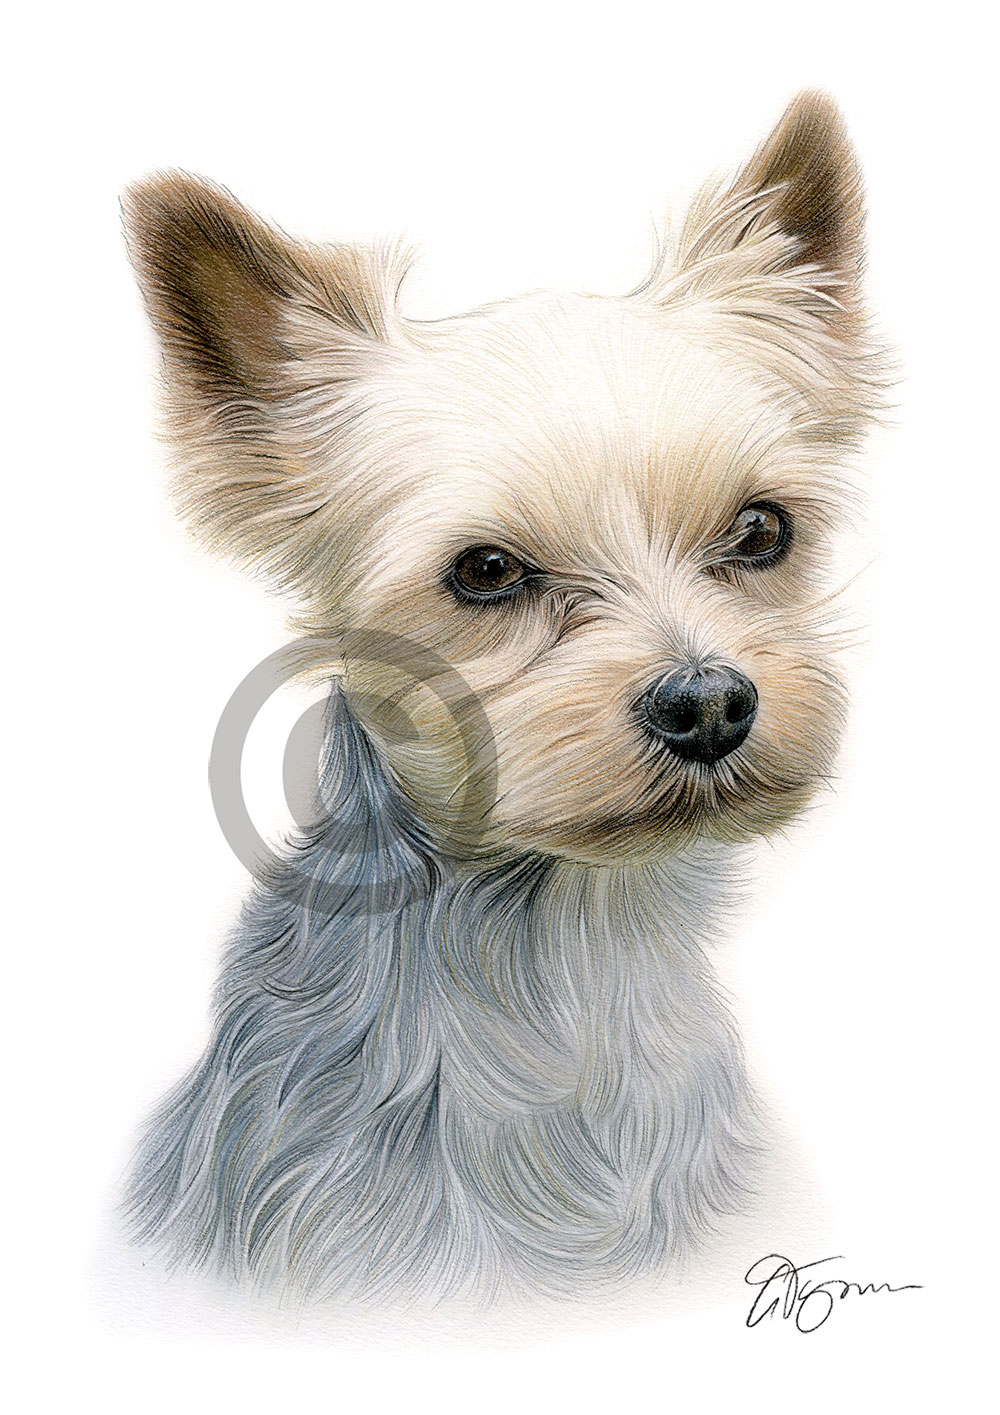 Colour pencil drawing of a Yorkshire Terrier by artist Gary Tymon